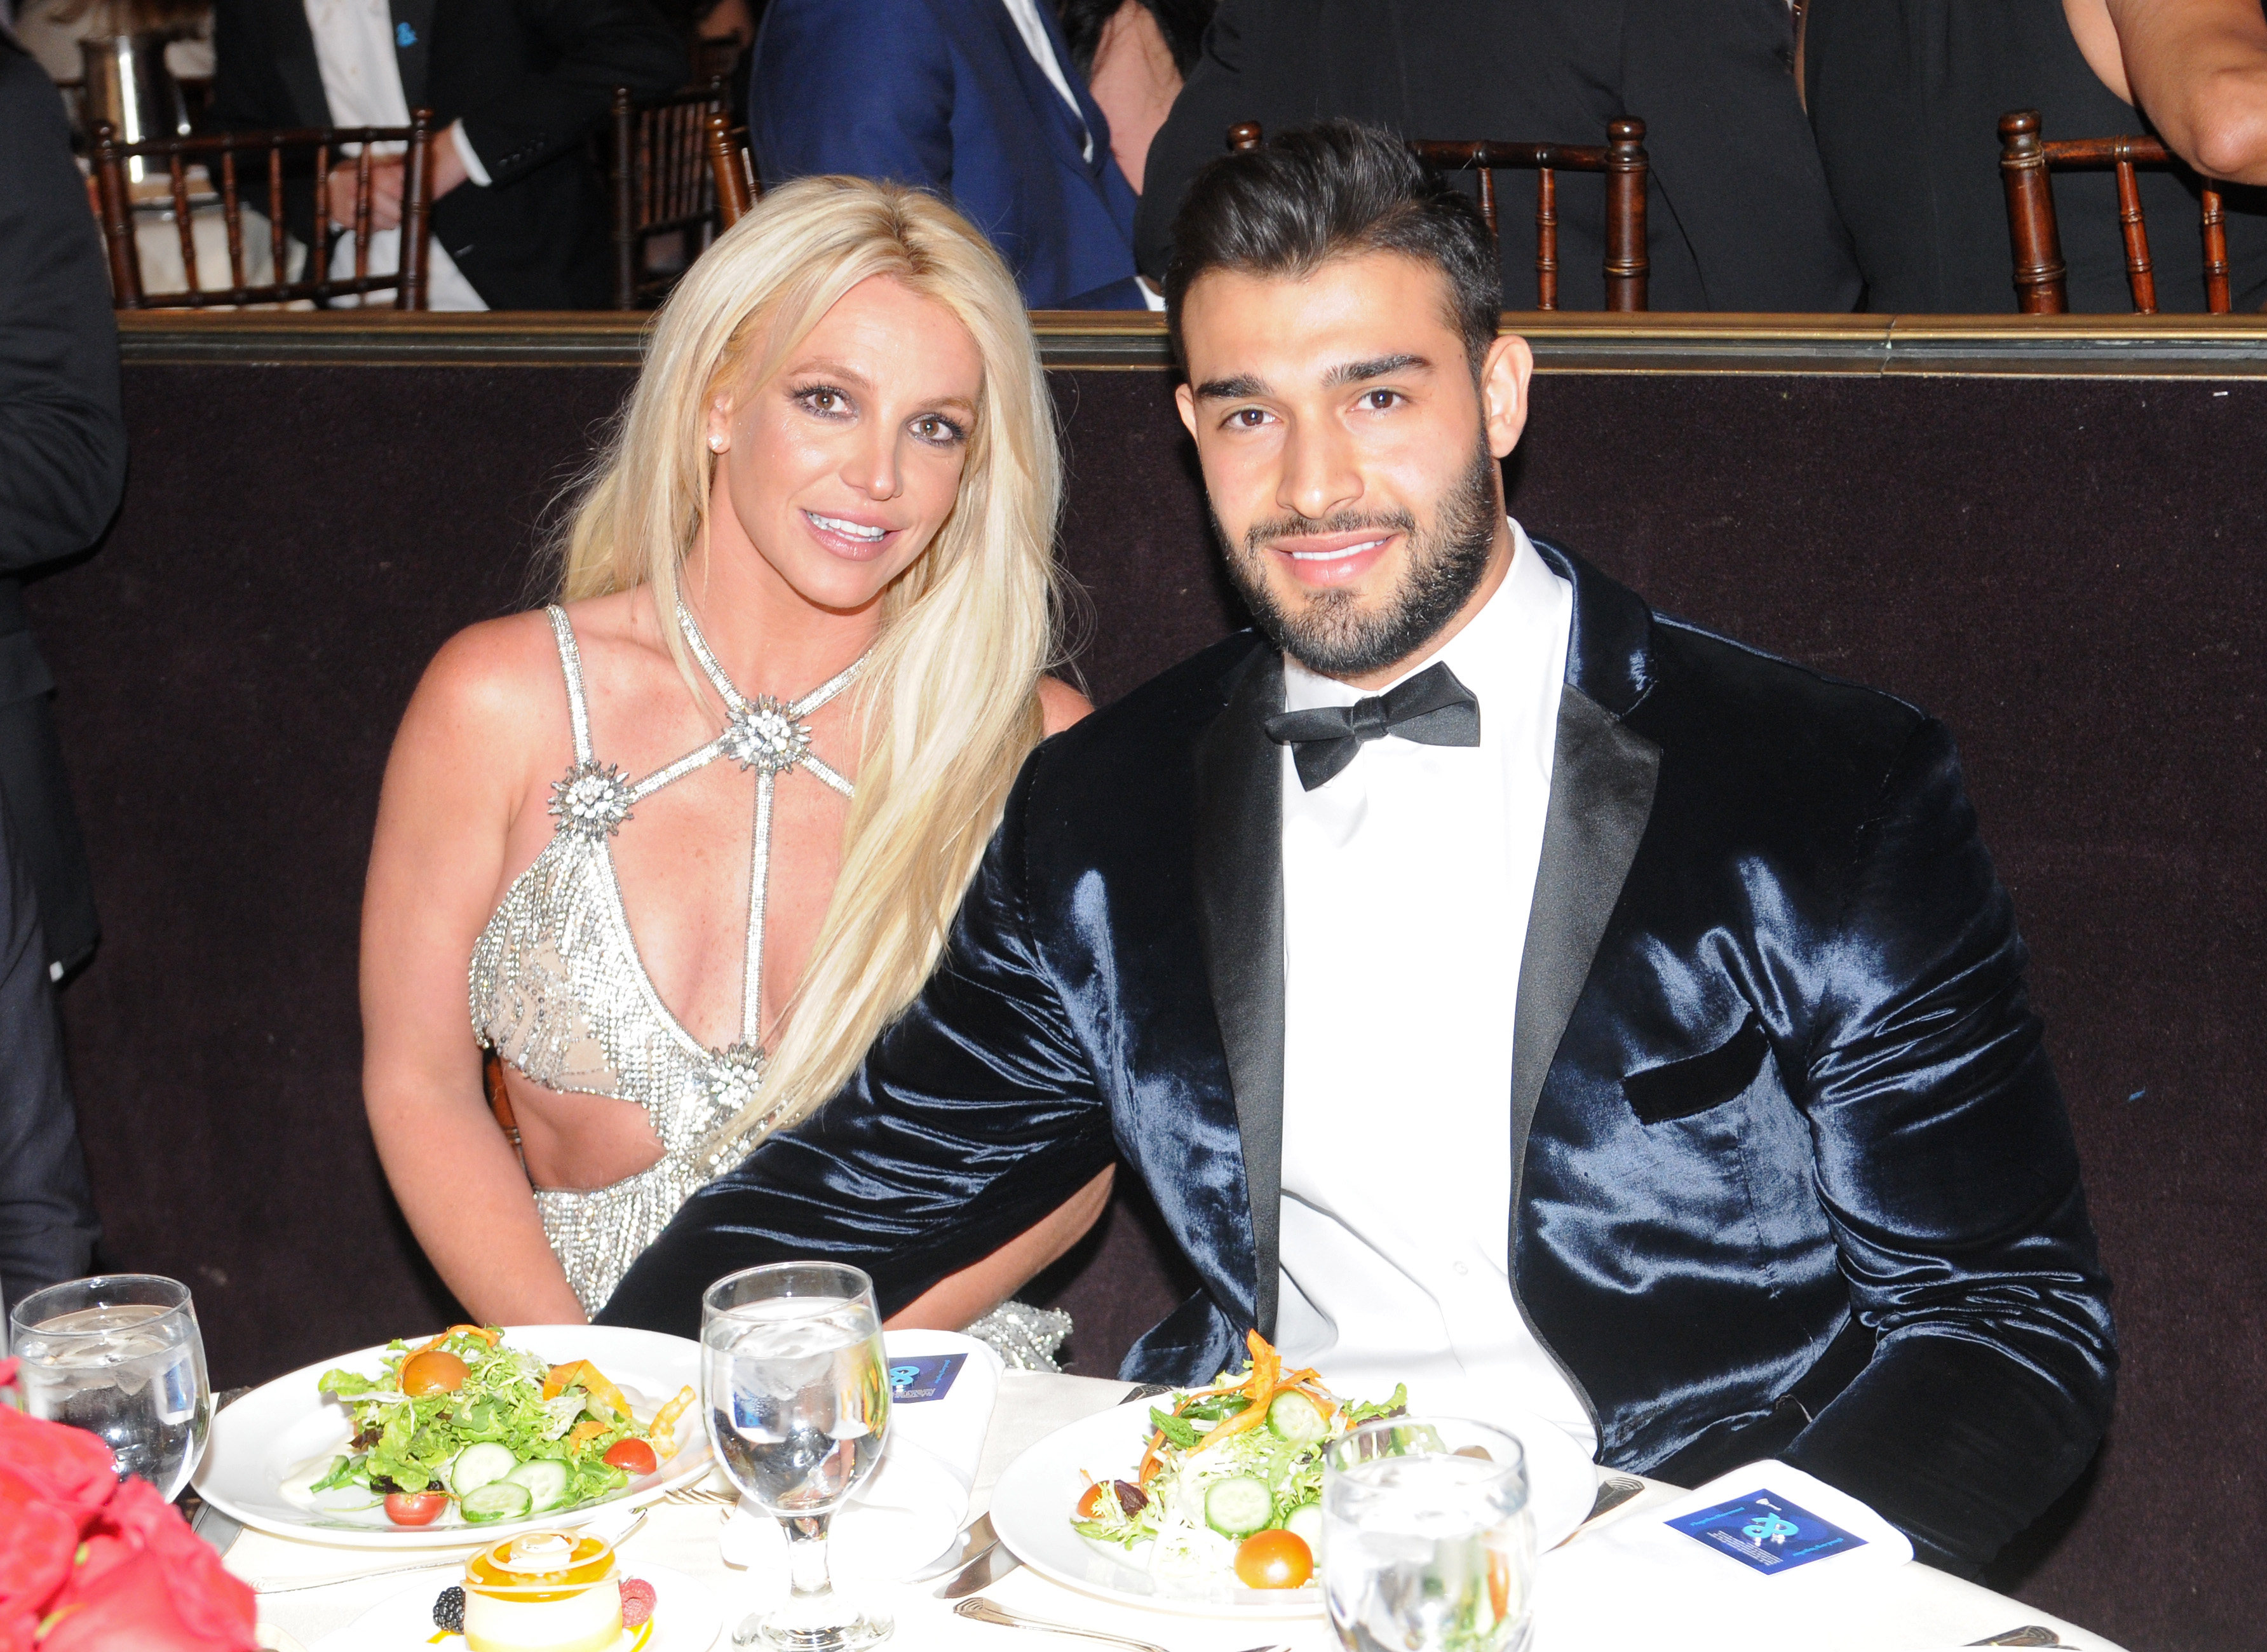 Britney Spears and her partner Sam Asghari. Photo: Getty Images for GLAAD / TNS